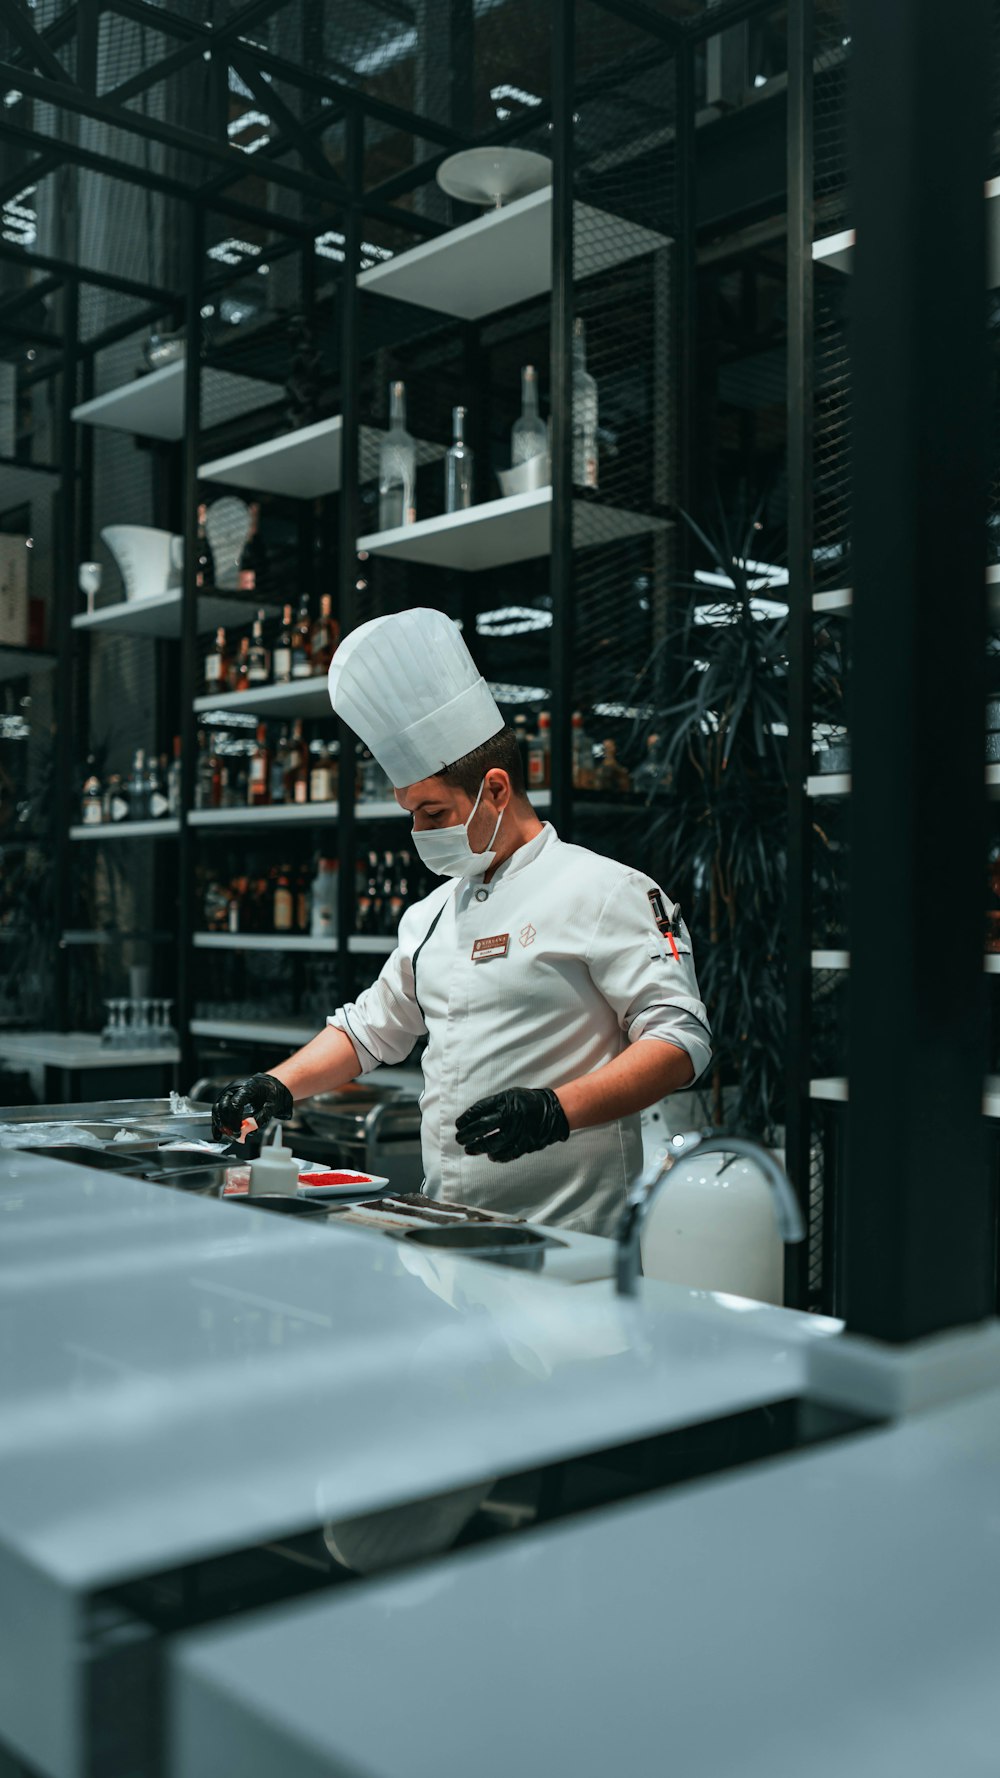 a man in a chef's hat is cooking in a kitchen